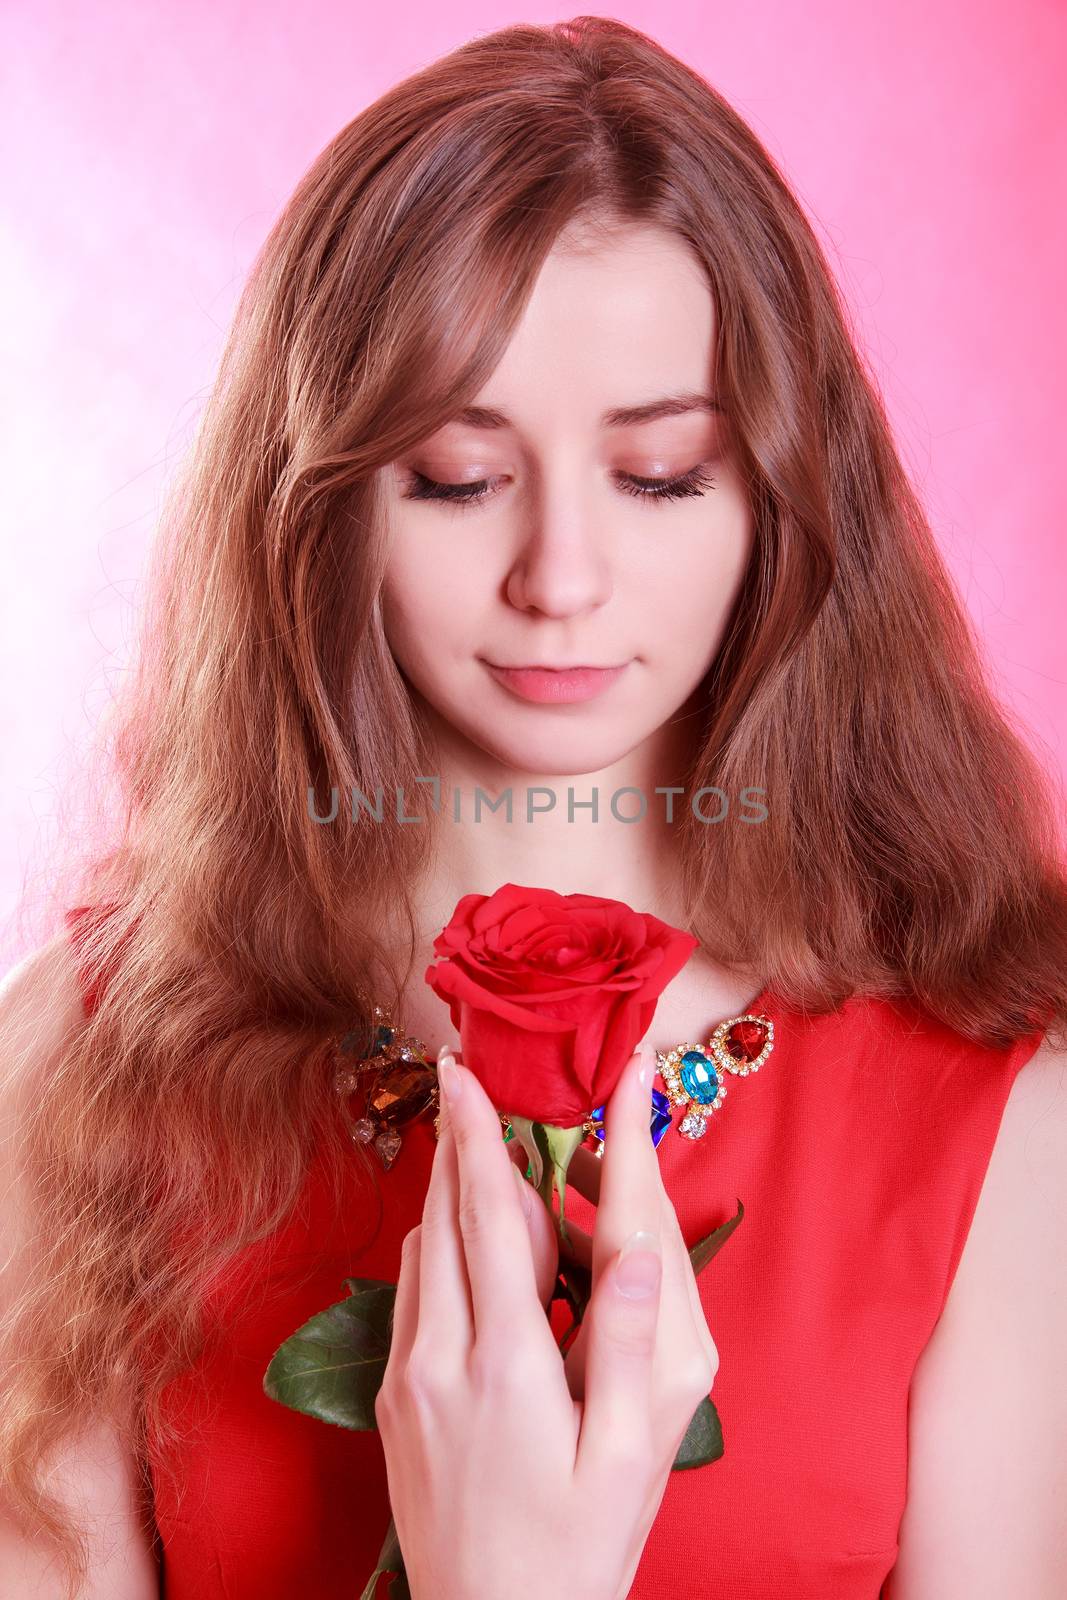 Portrait of a young attractive woman with a red rose by Artzzz